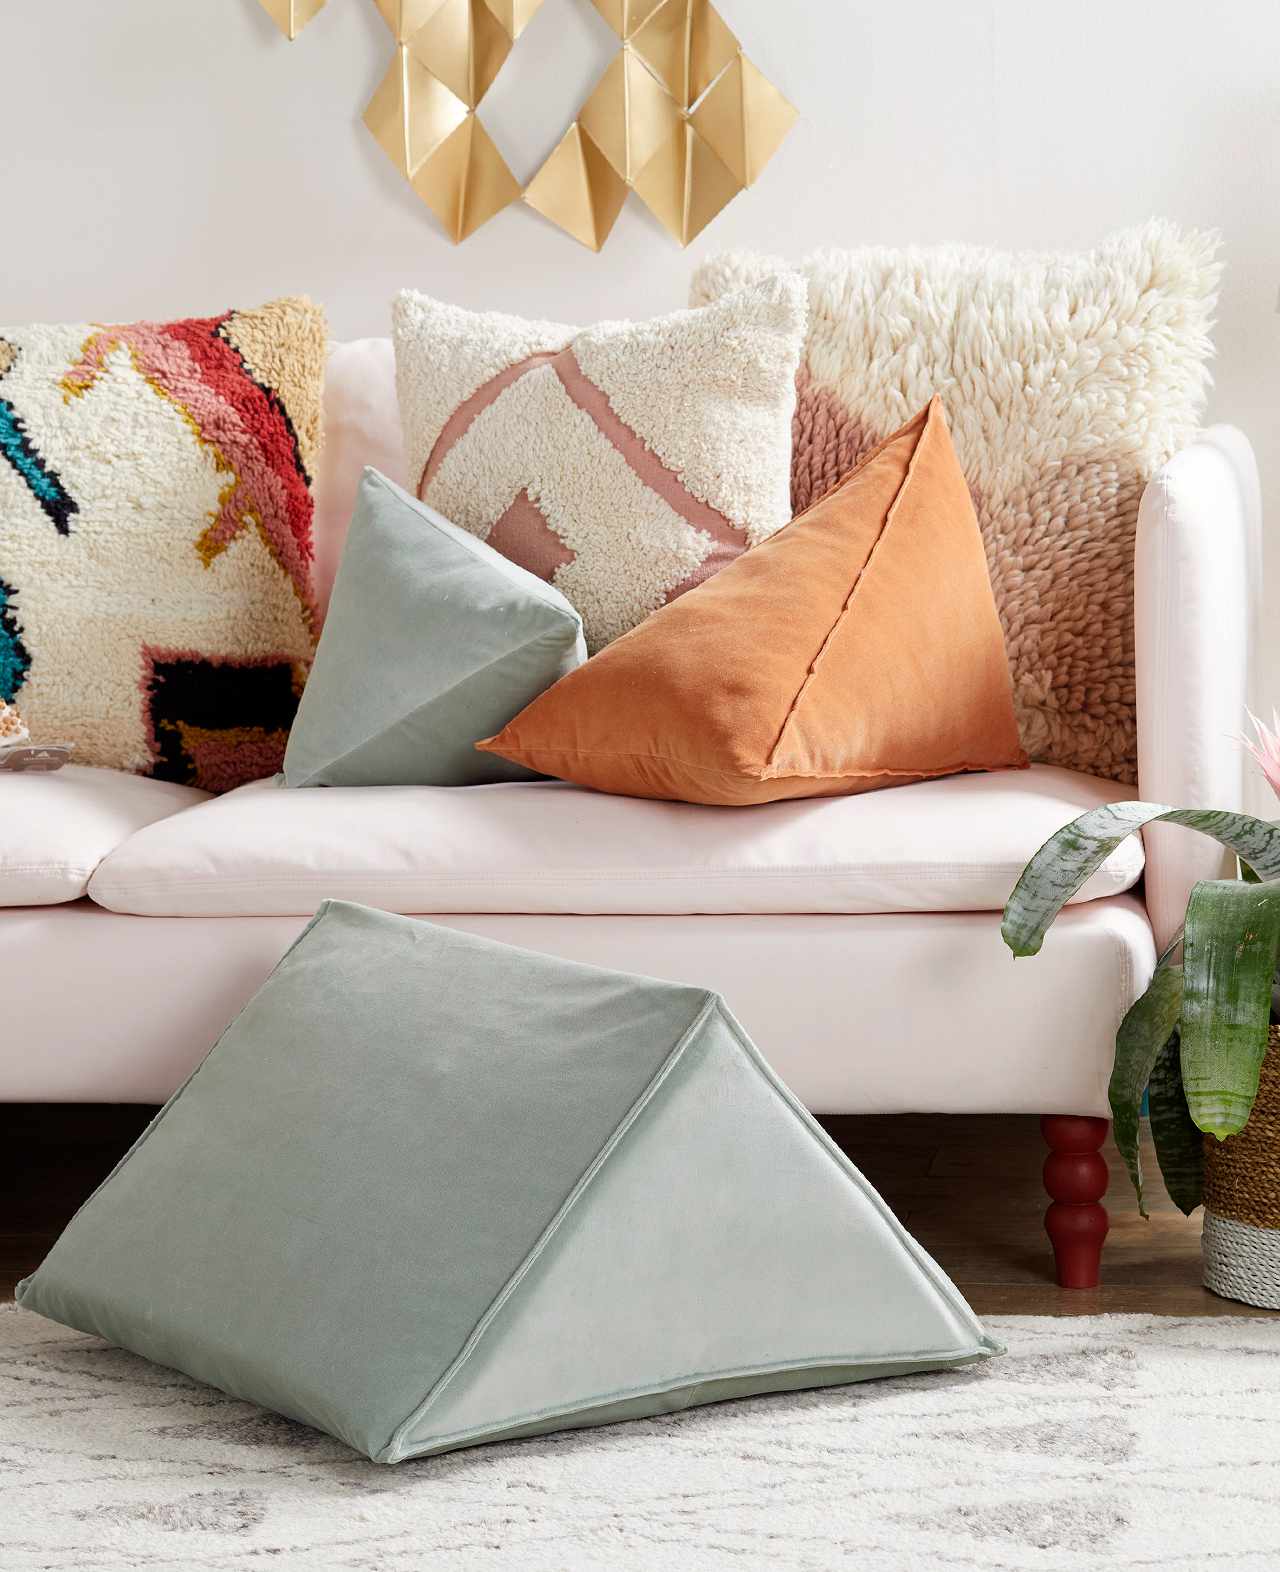 sofa with wedge pillows and soft colors